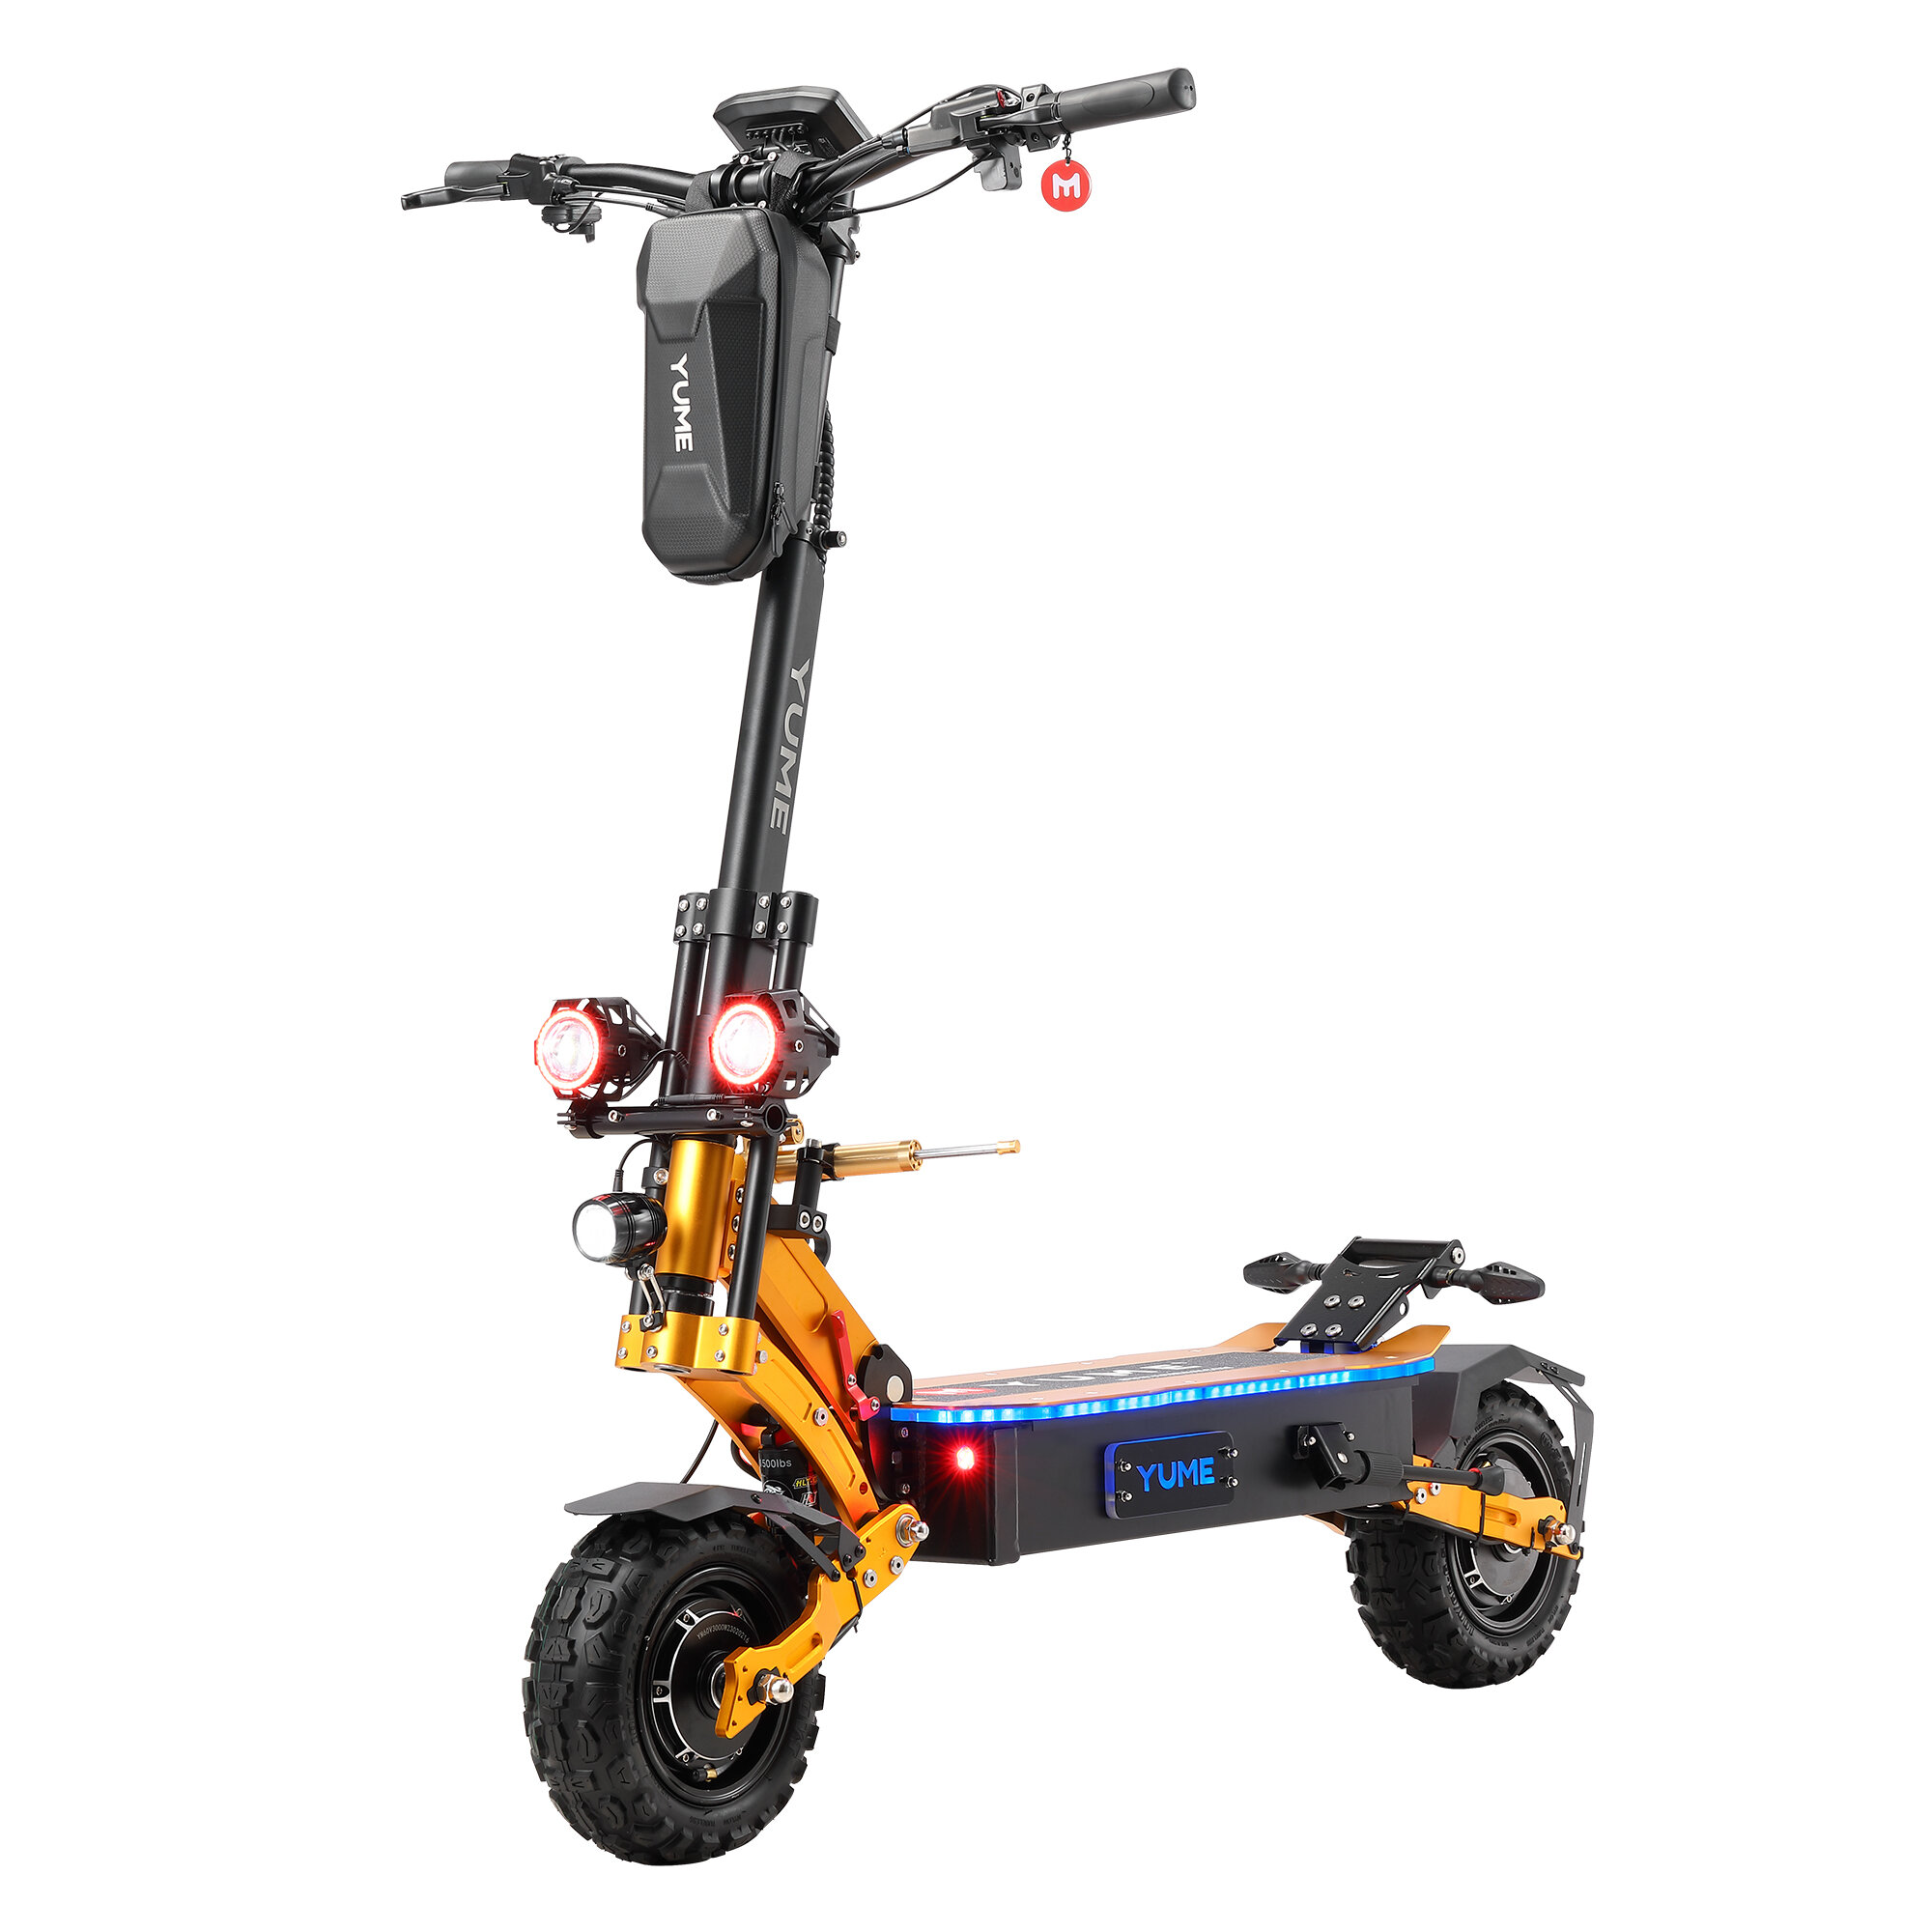 best price,yume,x11+,60v,30ah,3000wx2,11inch,electric,scooter,eu,discount